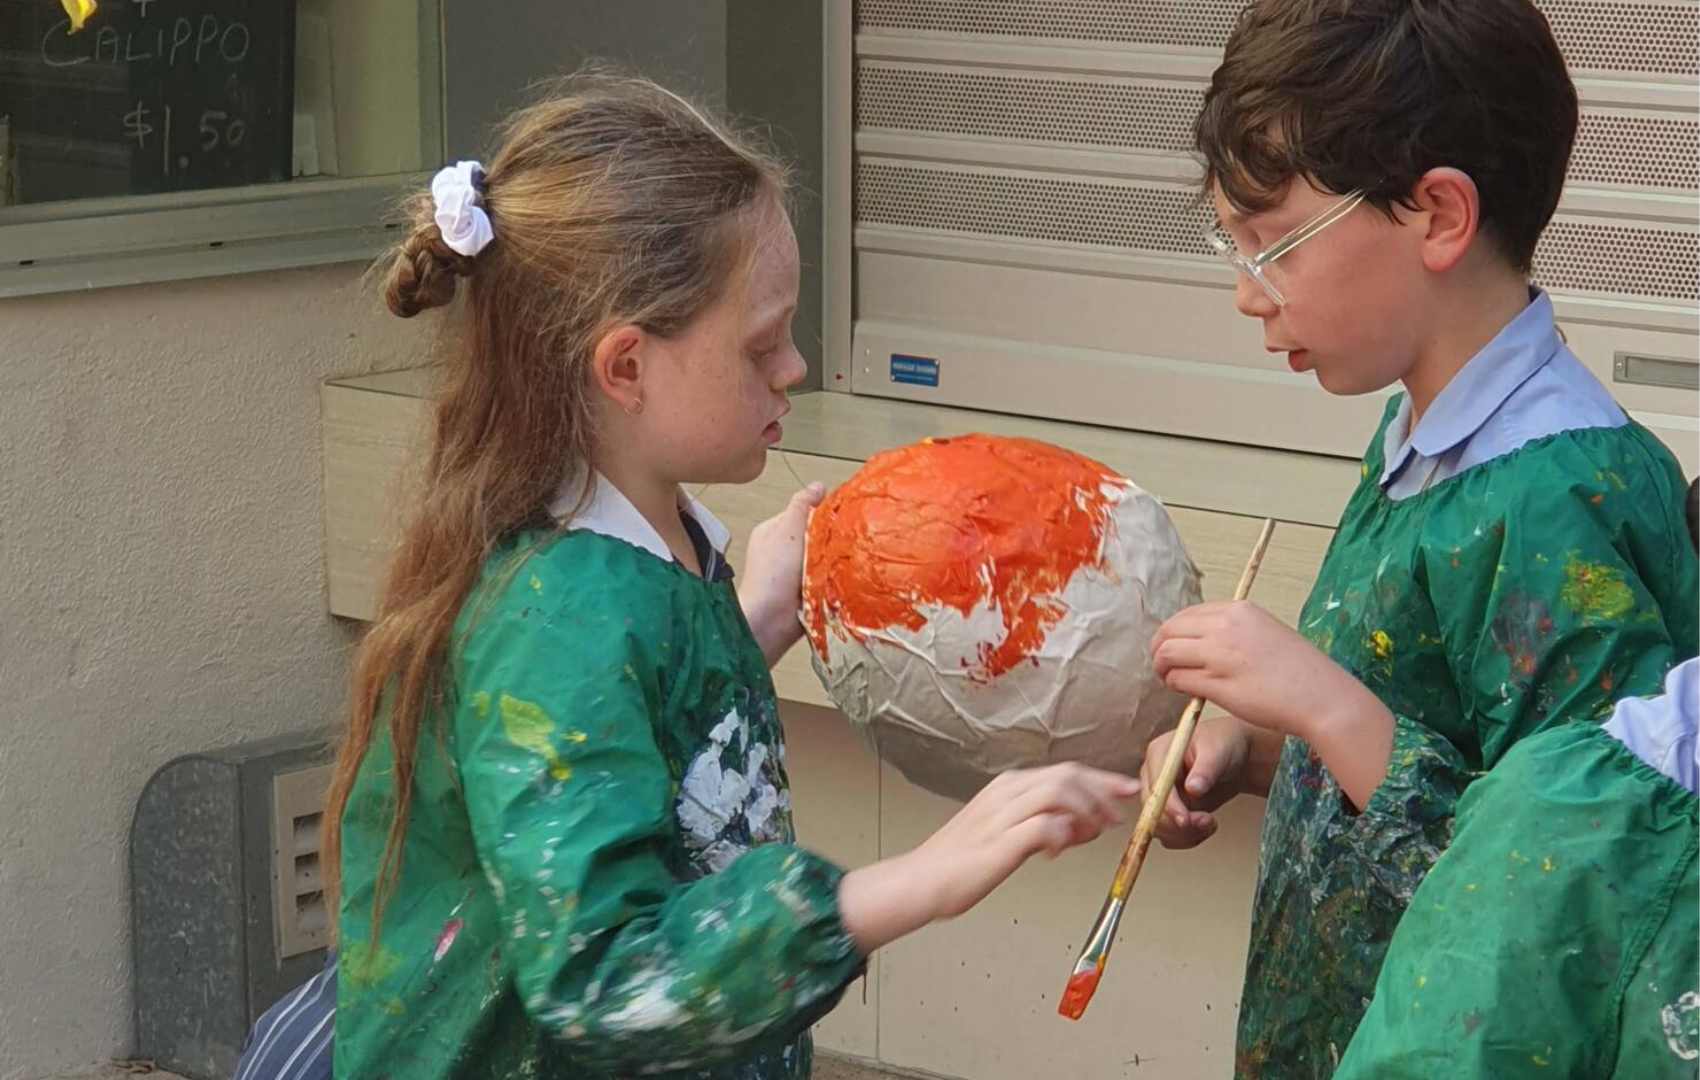 Two Year 5 students are painting a paper mache planet rust red. They are wearing green art smocks.